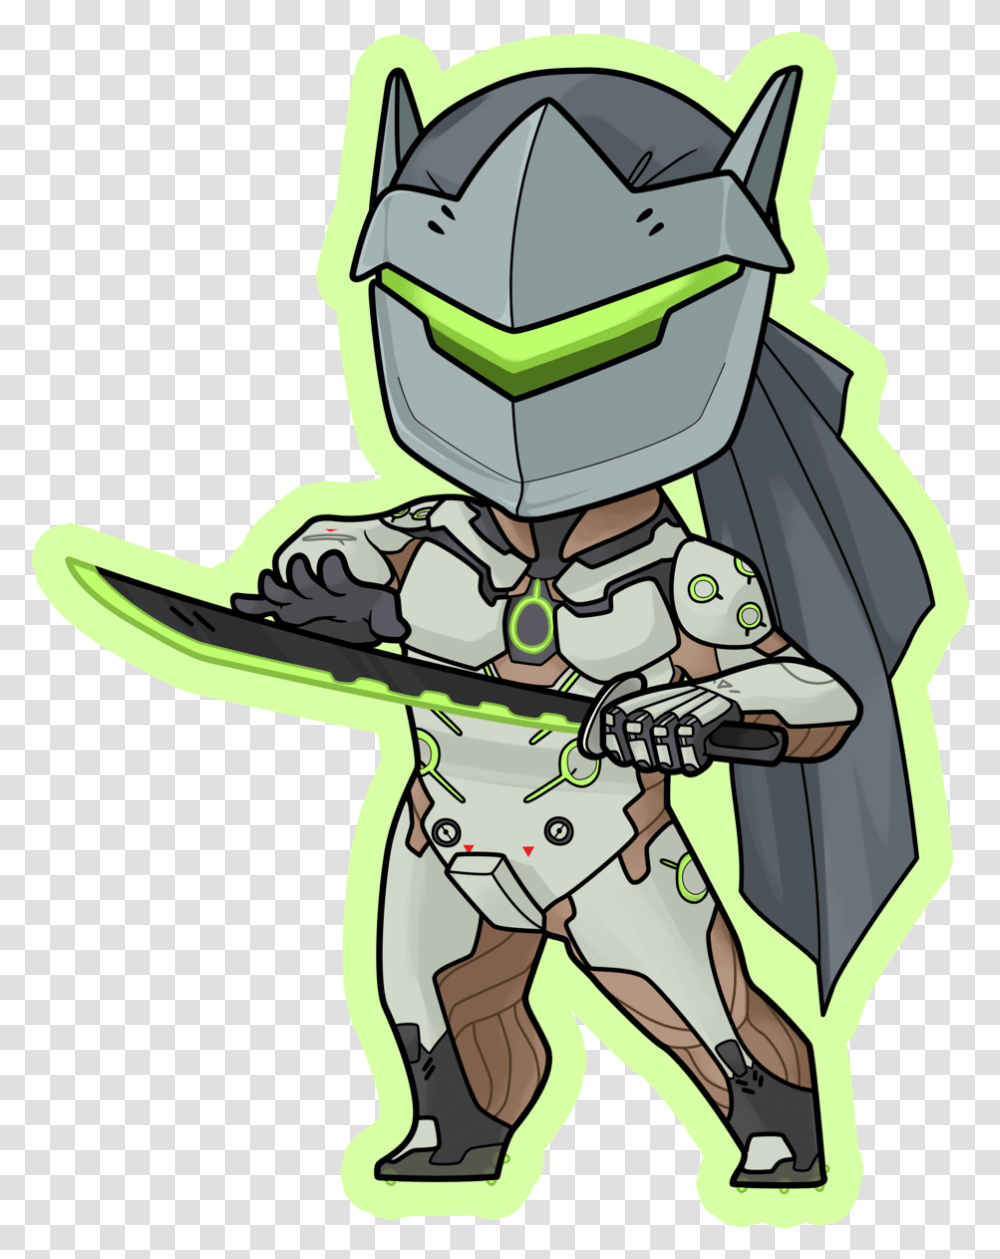 Finished Up The Genjisyou Can Find The Dog Sticker Overwatch Genji Chibi, Helmet, Apparel, Duel Transparent Png